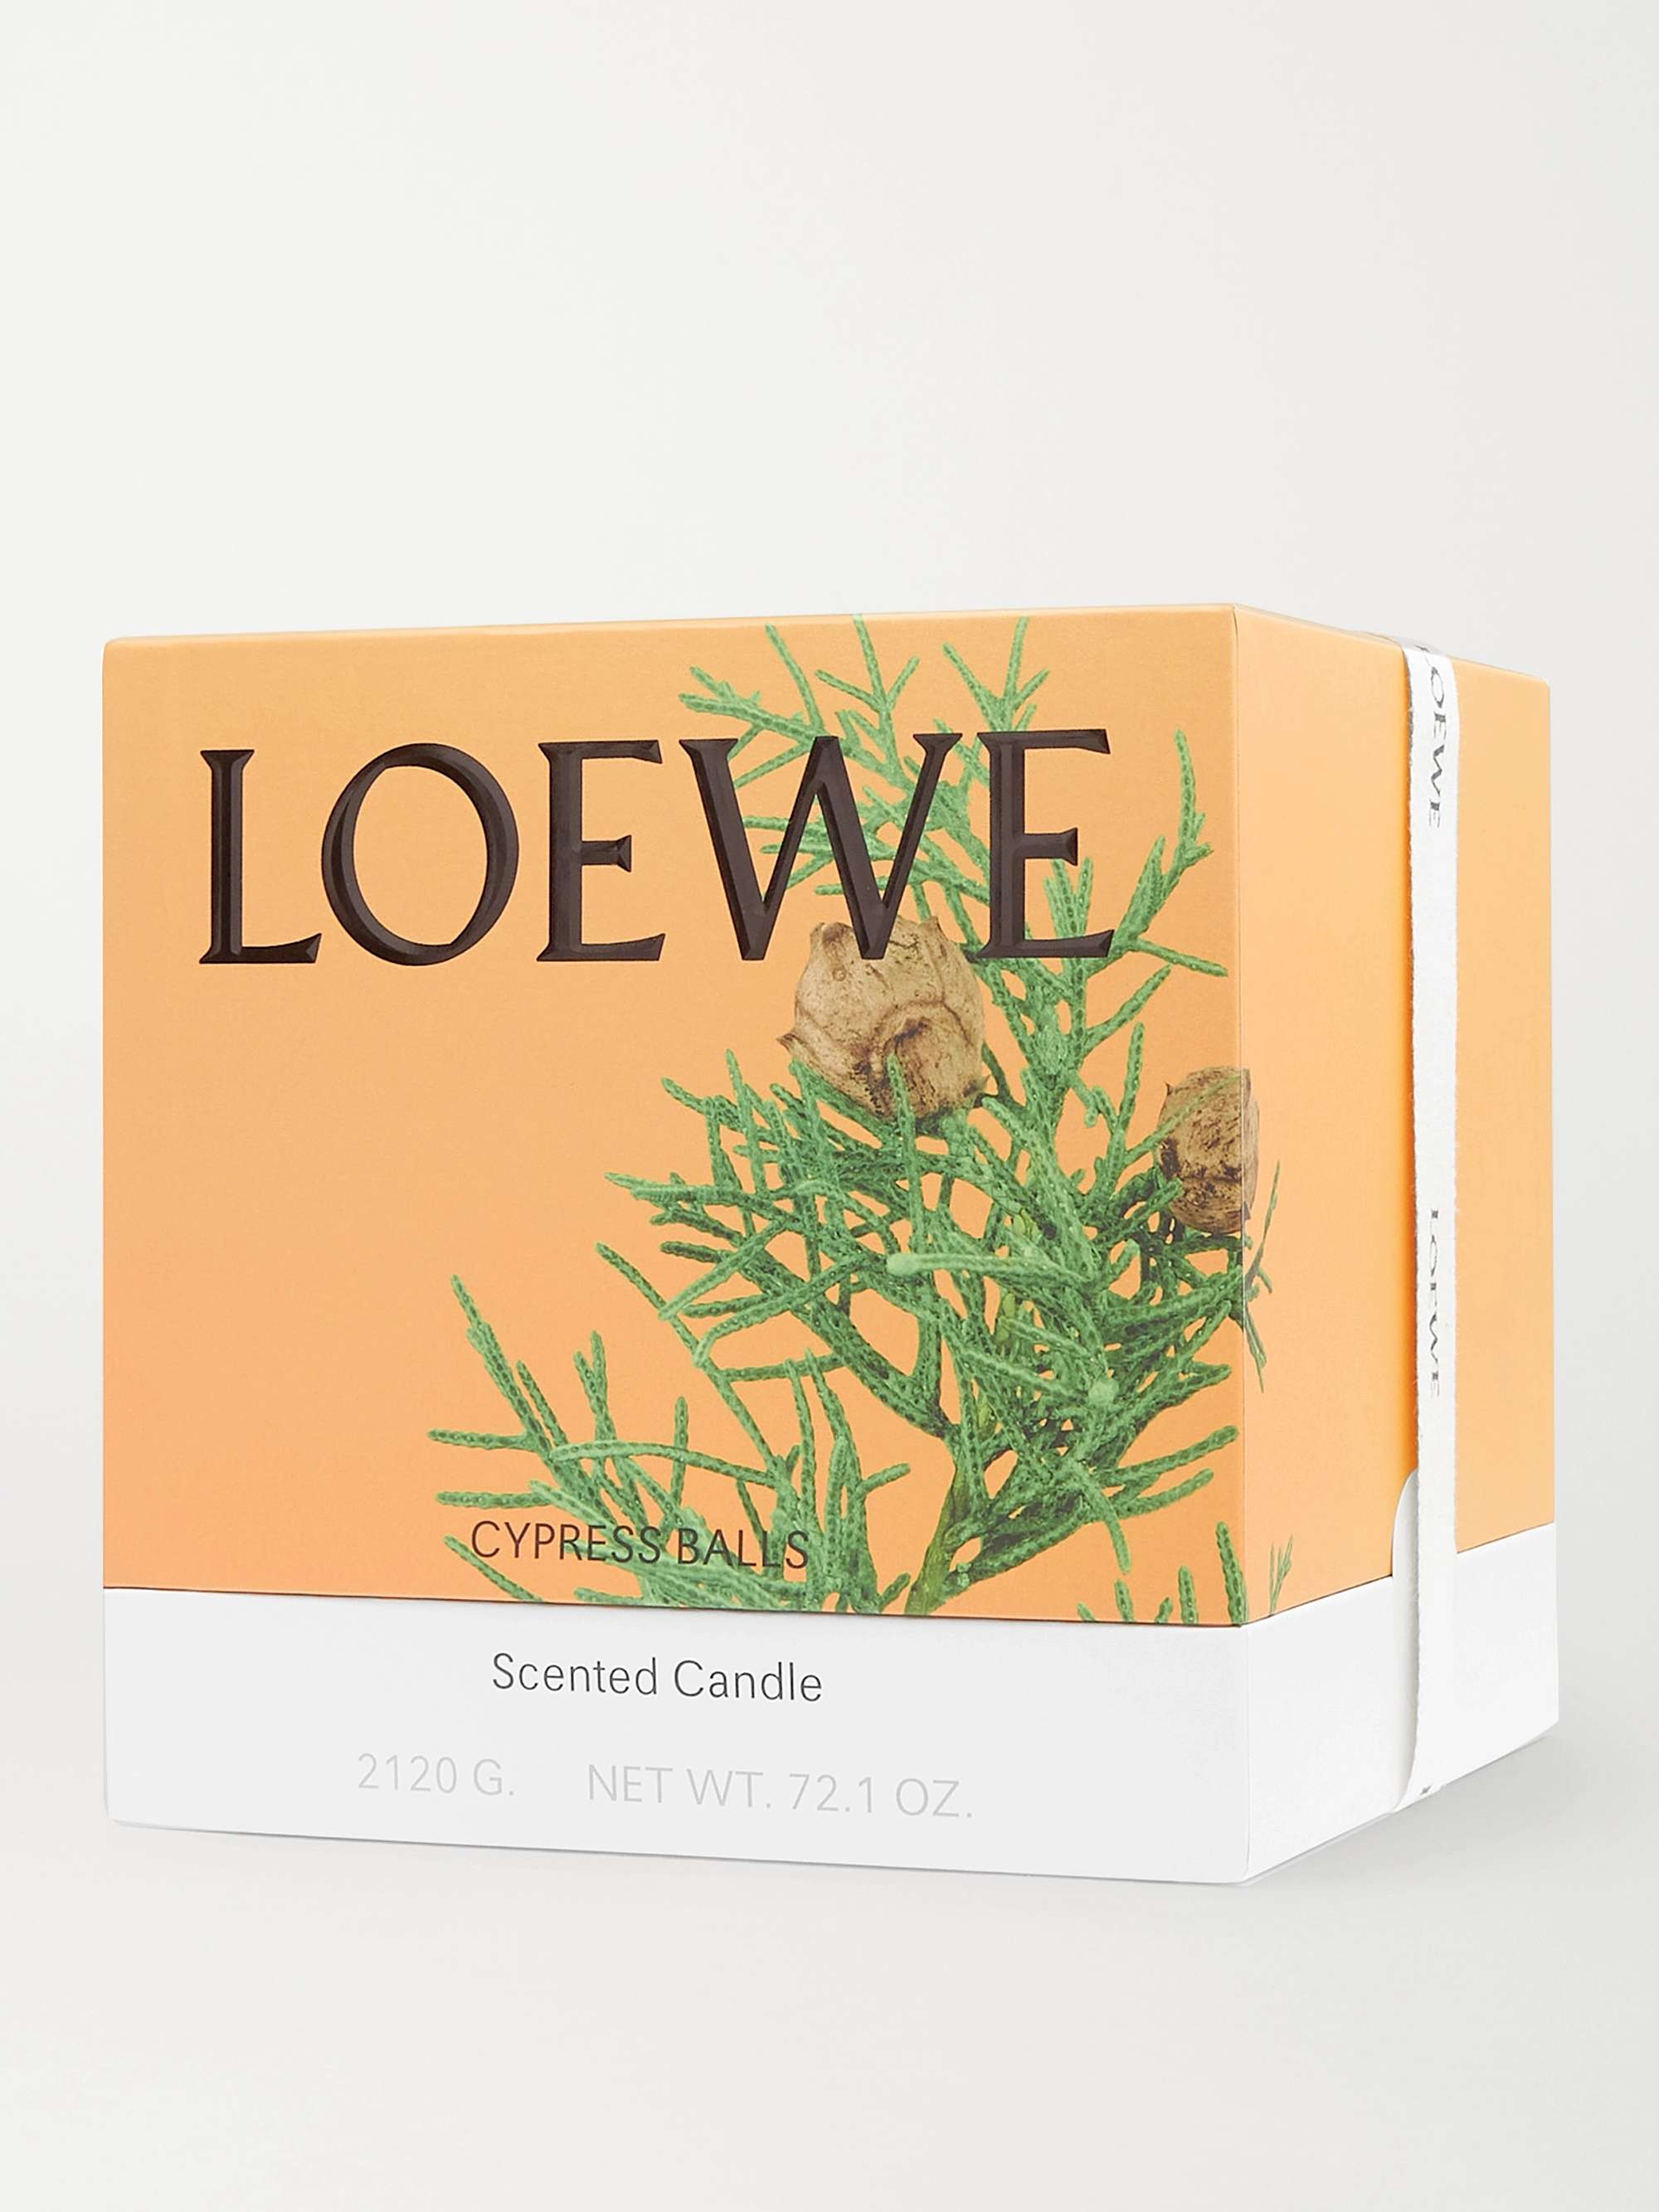 LOEWE HOME SCENTS Marihuana Scented Candle, 2120g